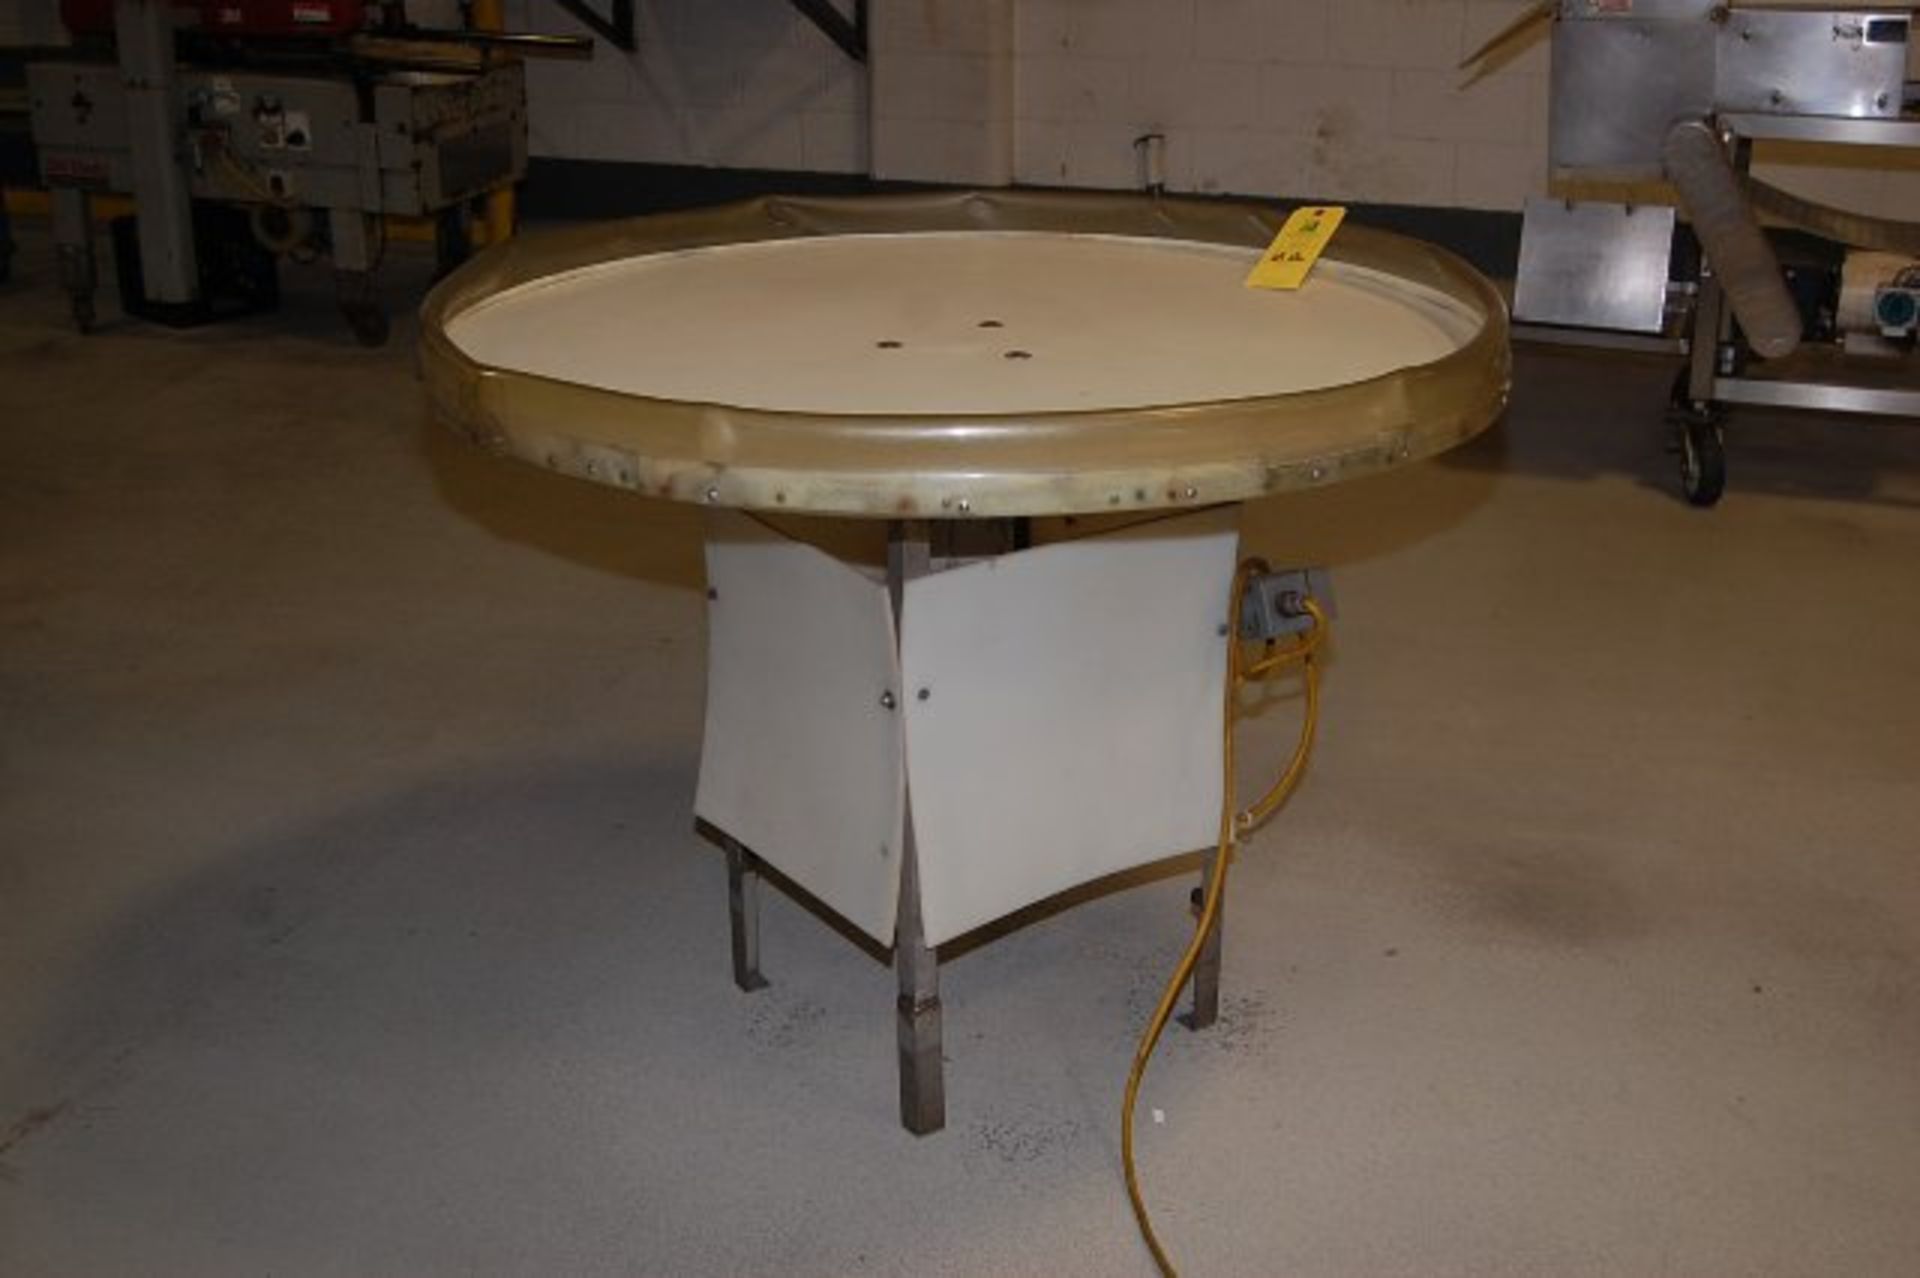 Motorized Turn Table Single Phase, 48 in. Diameter, Steel Stand RIGGING FEE: $50